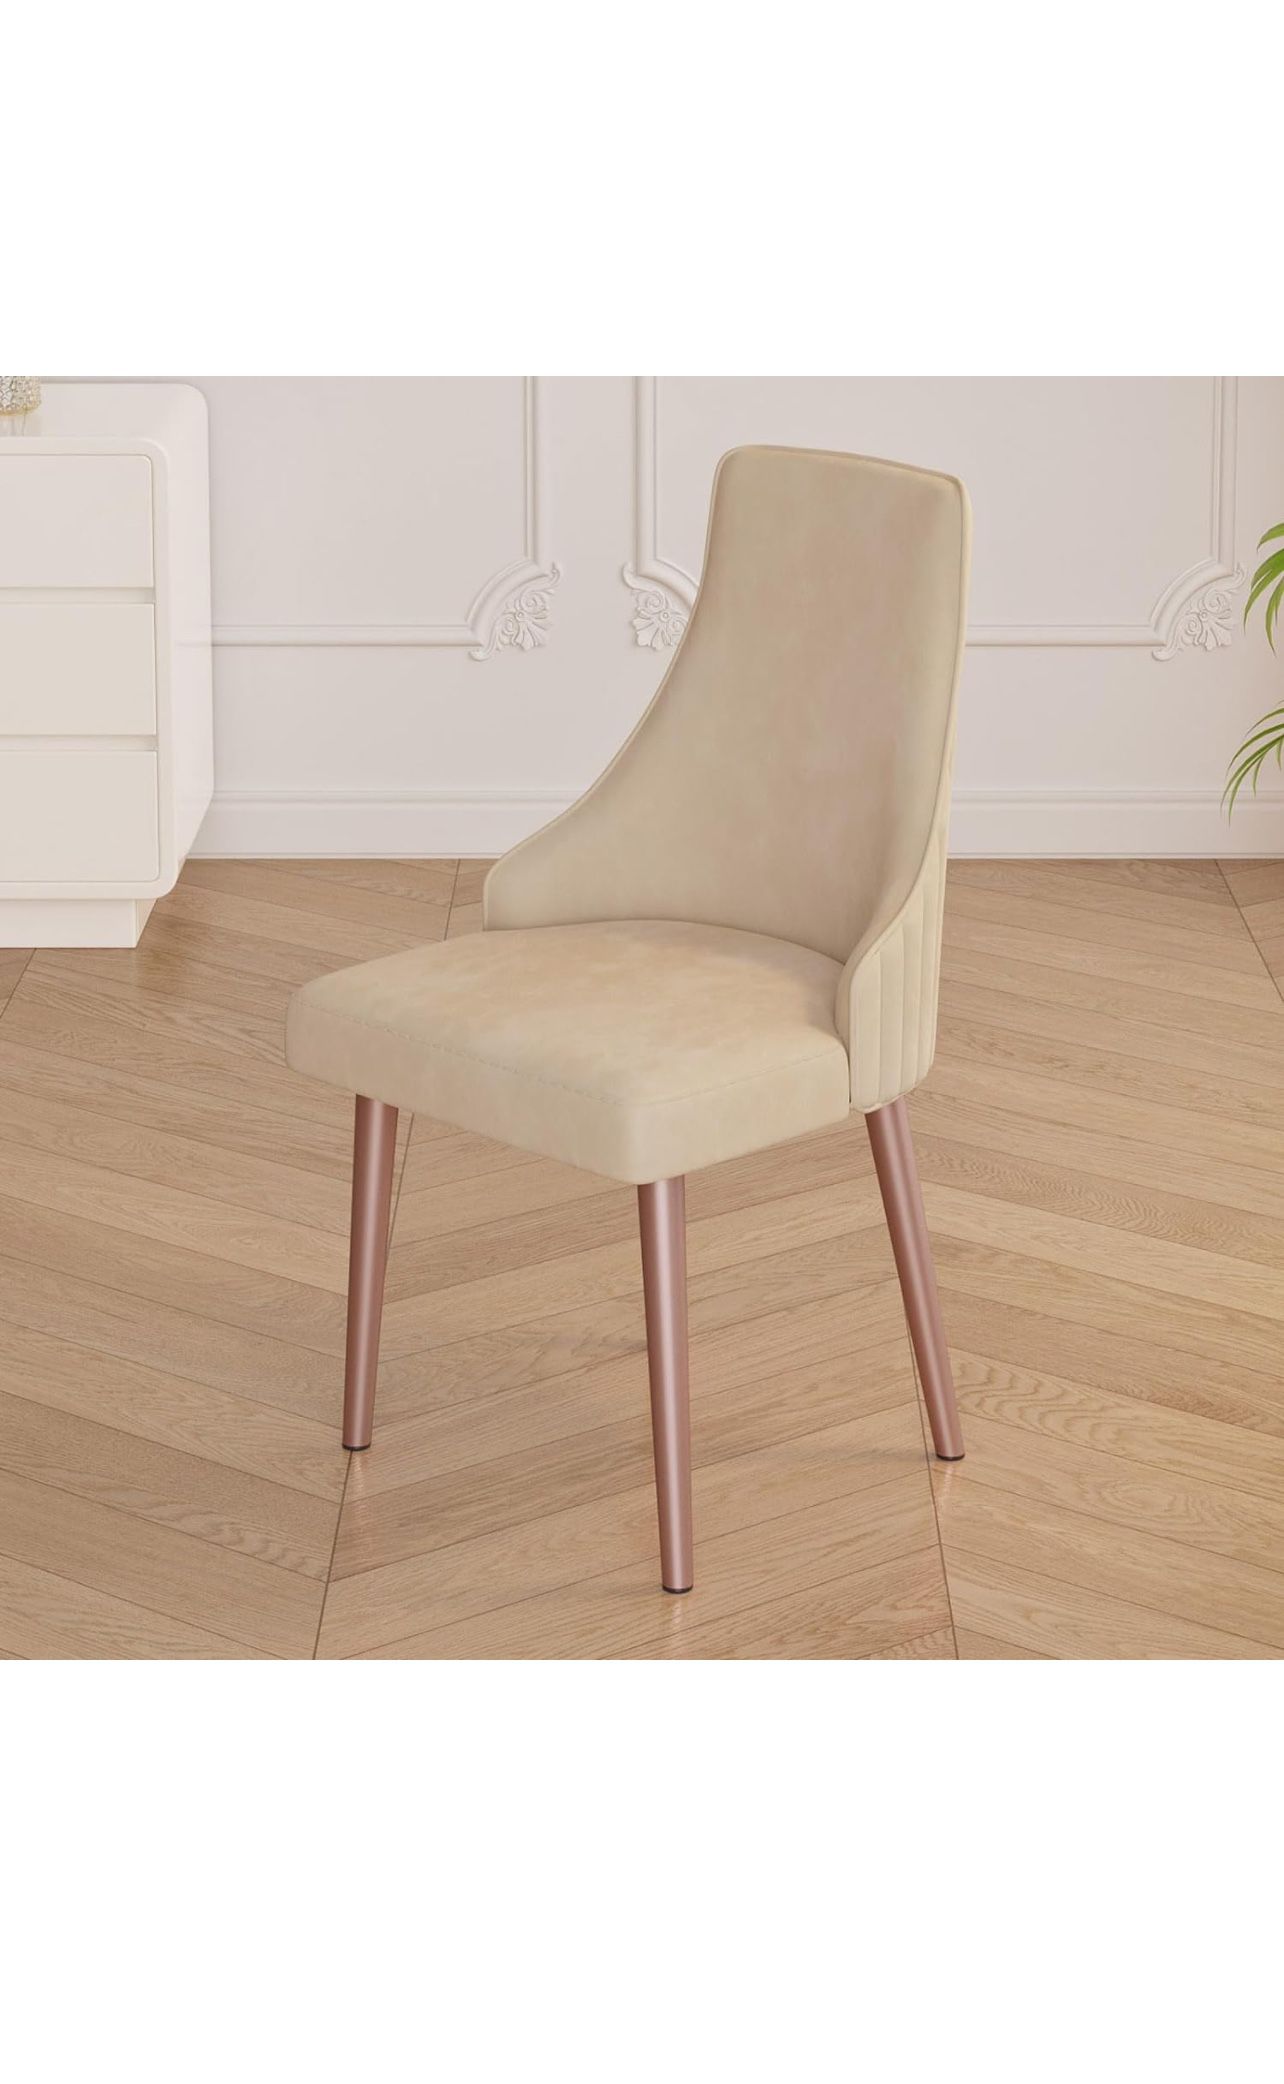 Light Brown Dining Chair, Comfy Elastic Spong Cushion and Backrest, Modern Chairs with Metal Pink Gold Legs, Great Choice for Bedroom, Living Room, Di